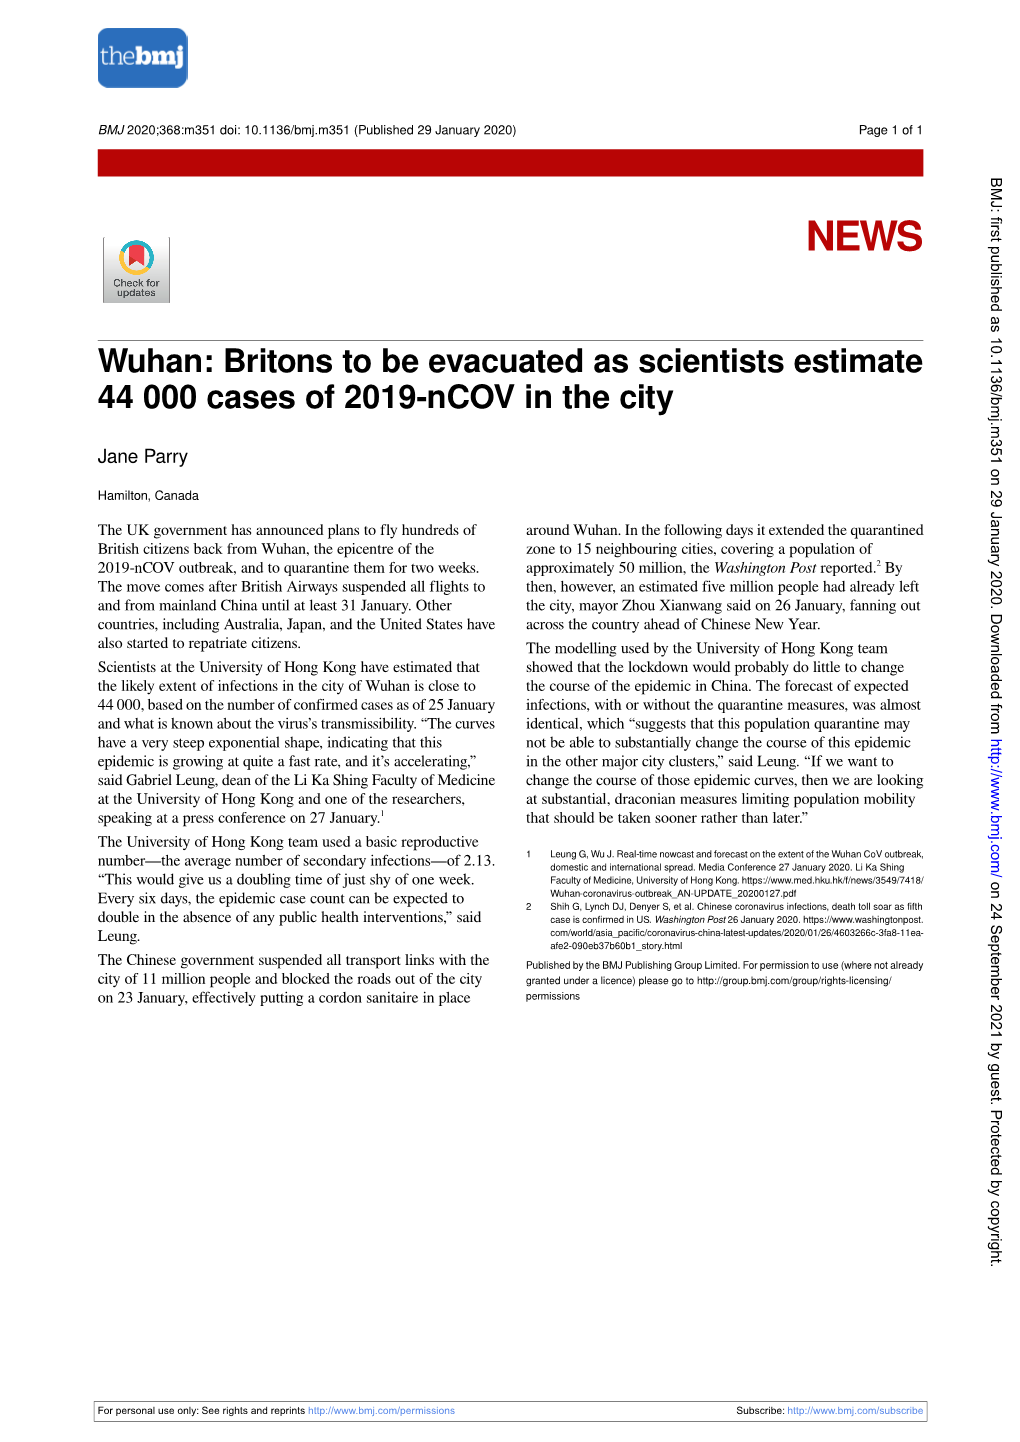 Wuhan: Britons to Be Evacuated As Scientists Estimate 44 000 Cases of 2019-Ncov in the City